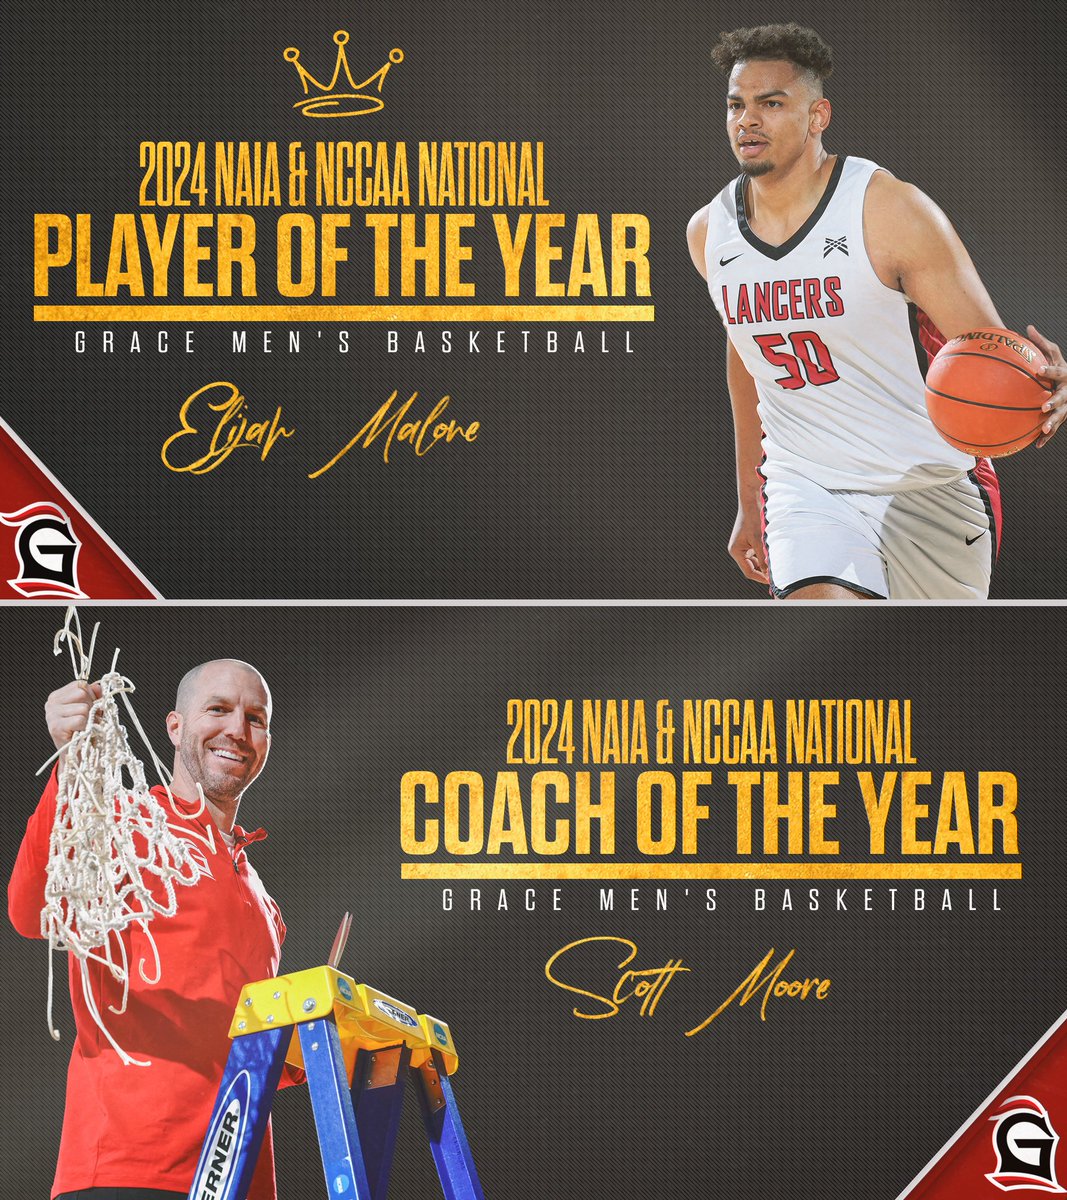 An unprecedented season for @GraceBasketball ended with a pair of crowning awards! 👑 - Elijah Malone, NAIA-NABC + NCCAA National Player of the Year 🏀 - Scott Moore, NAIA-NABC + NCCAA National Coach of the Year gclancers.com/news/2024/4/1/…